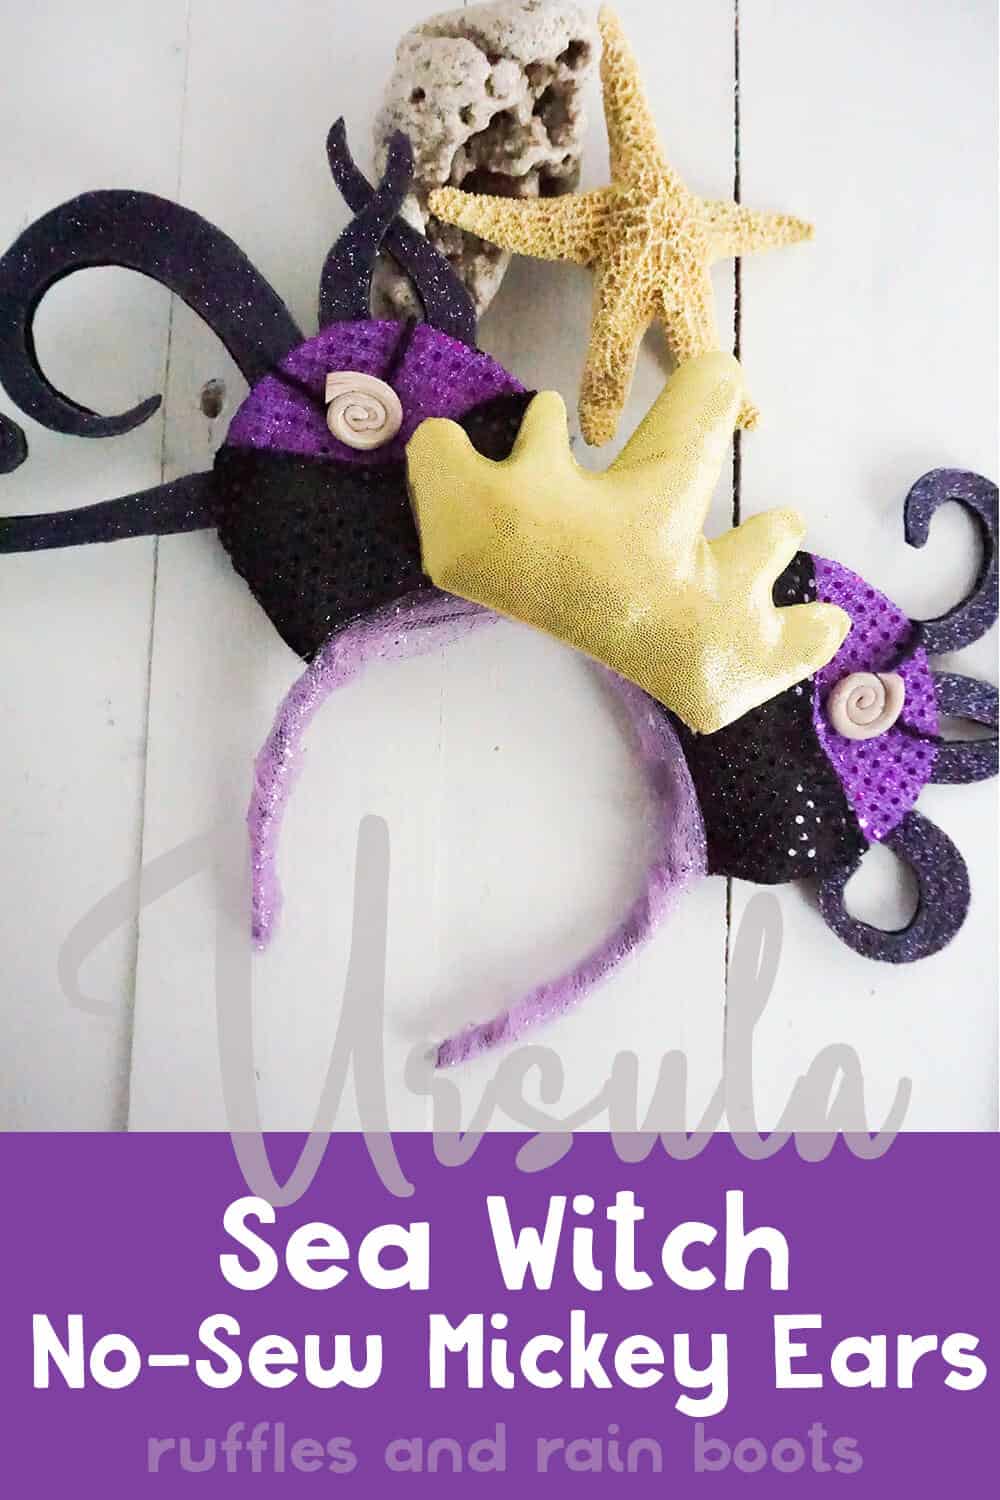 overhead view of mickey ears with tentacles like ursula the sea witch Ursula sea witch on a white wood table with text which reads no-sew mickey ears